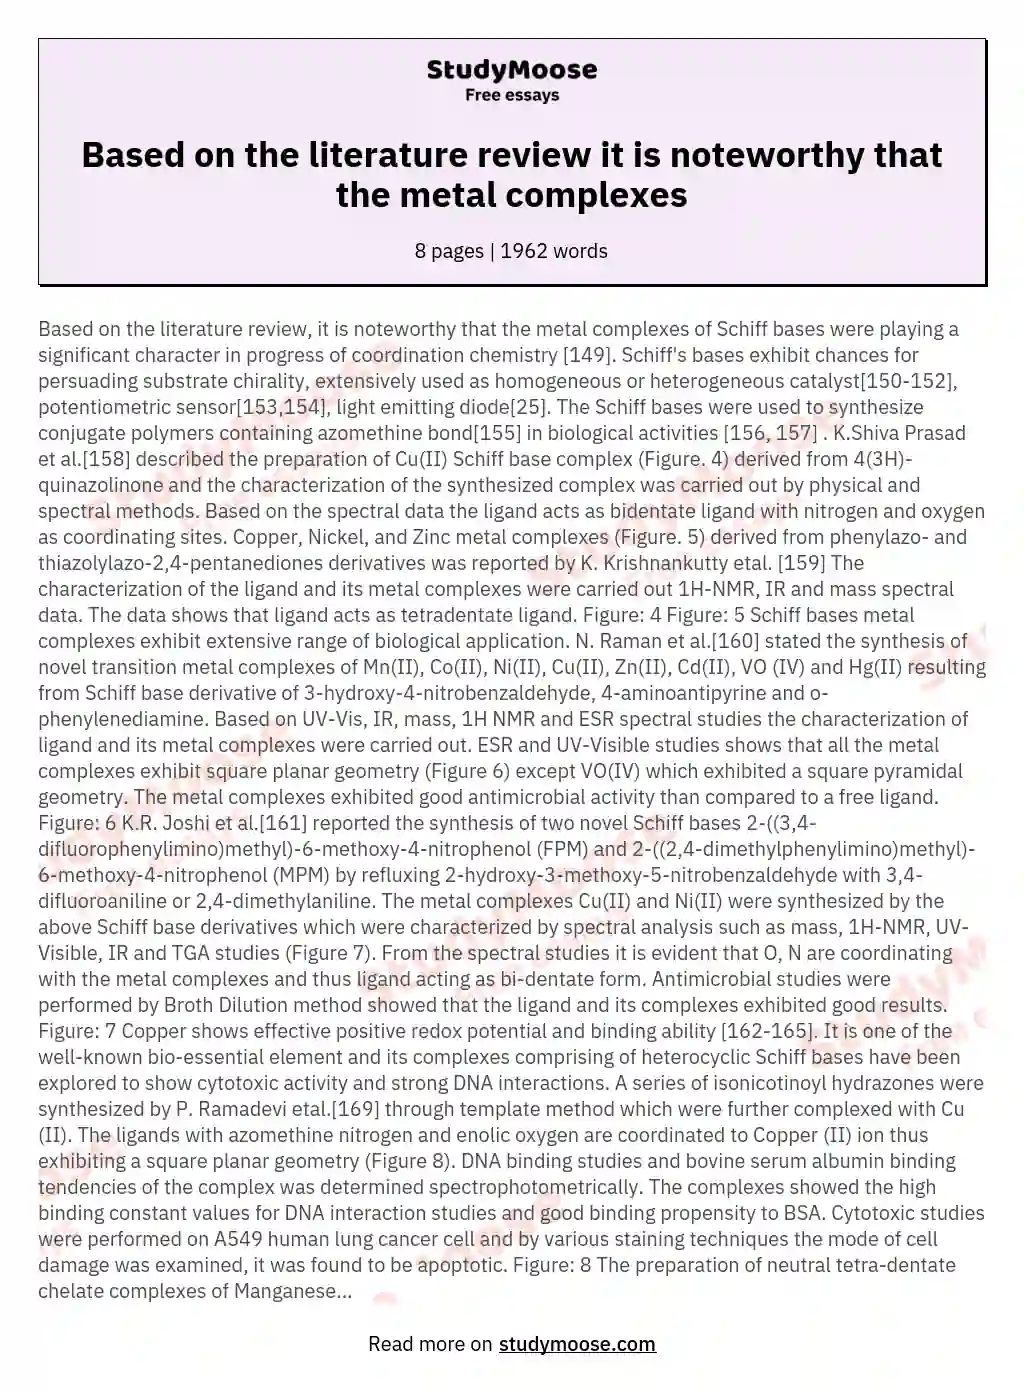 Based on the literature review it is noteworthy that the metal complexes essay